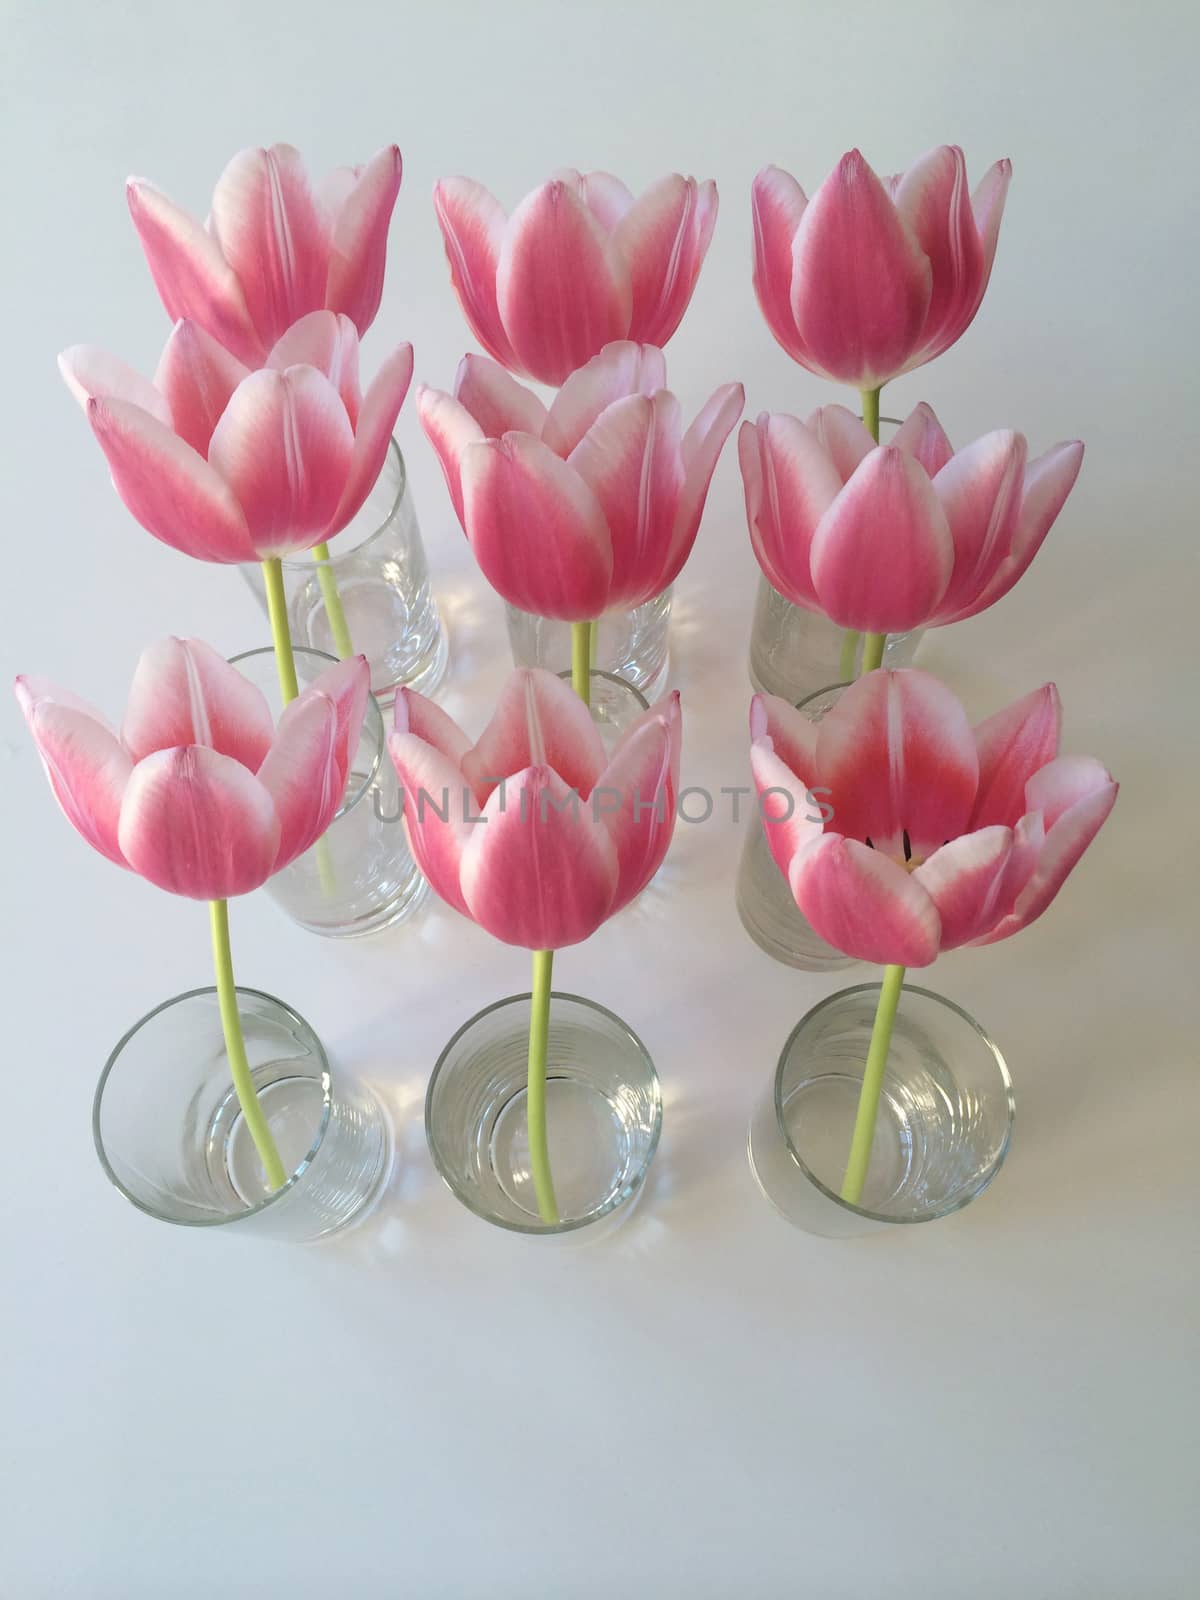 Pink tulips in vase by mmm